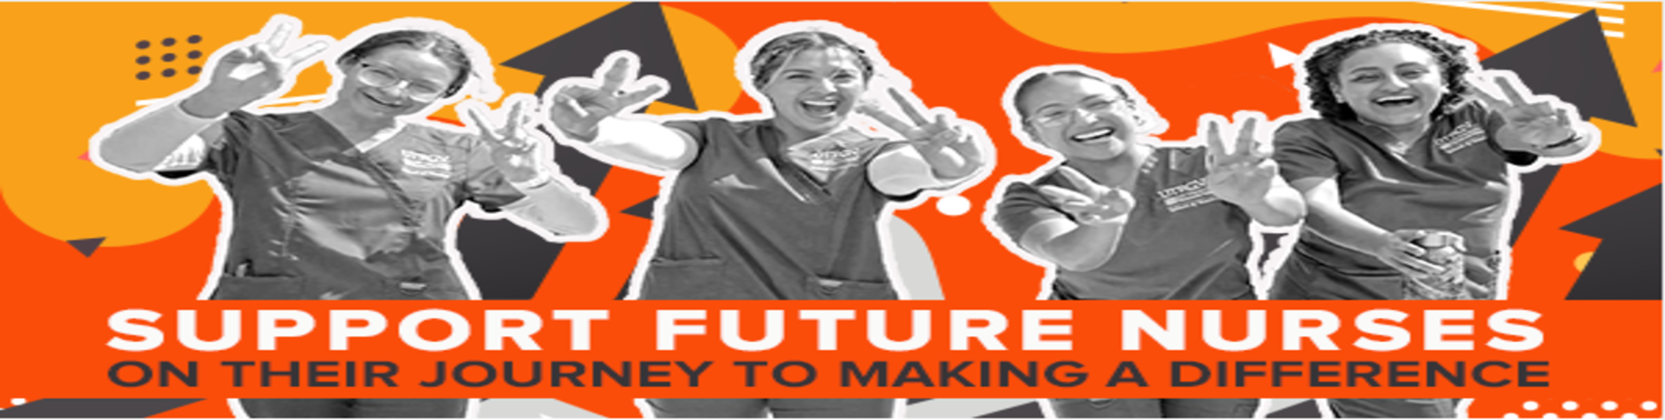 supporting future nurses Page Banner 